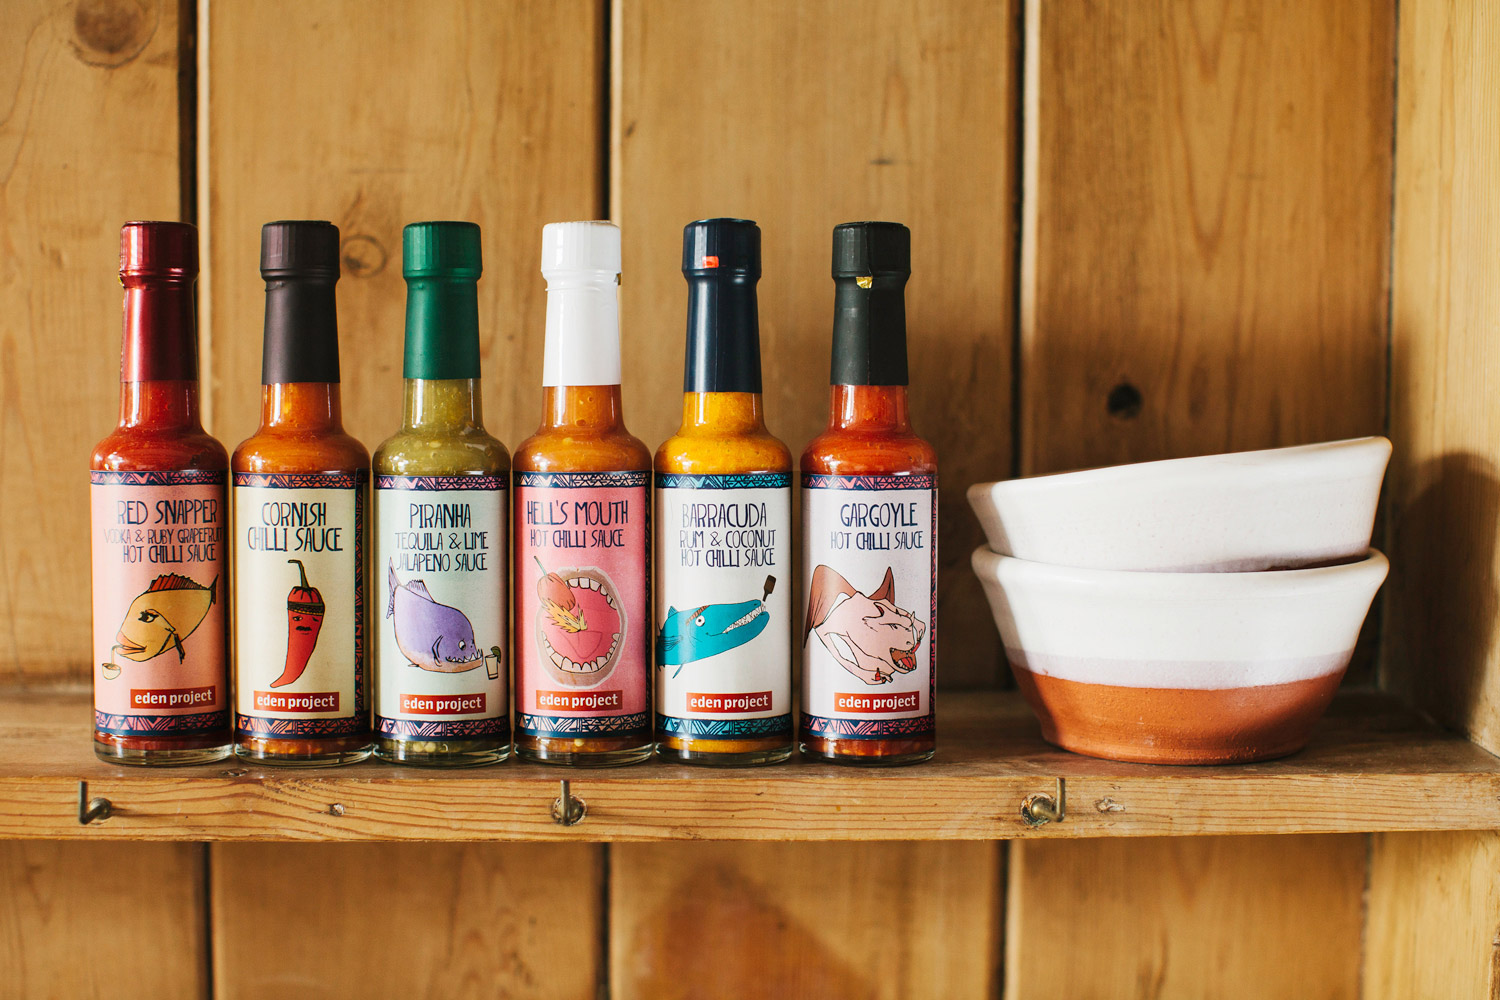 creative-packaging-eden-project-chilli-sauces-design-illustration-pic3